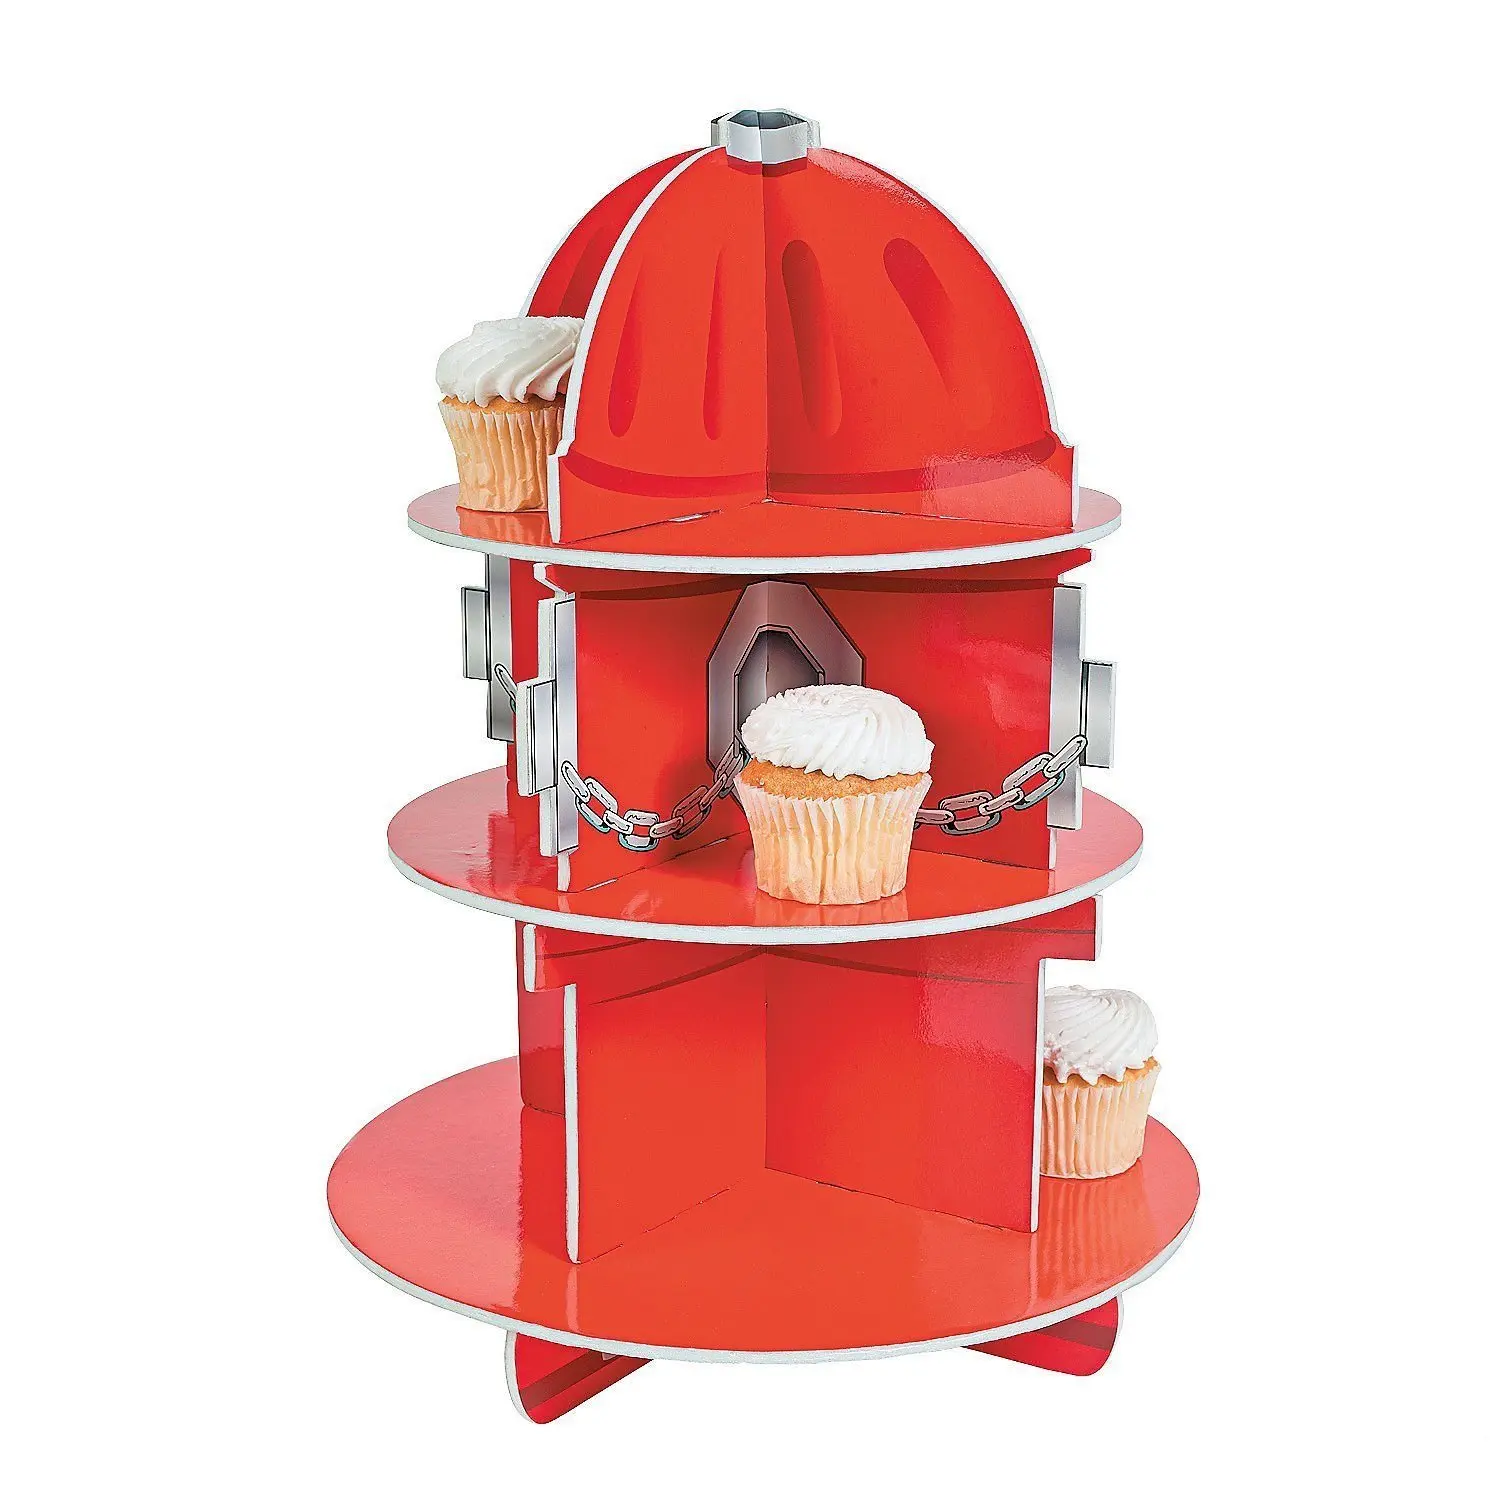 Buy Red Fire Hydrant 3 Tier Cupcake Holder Fireman